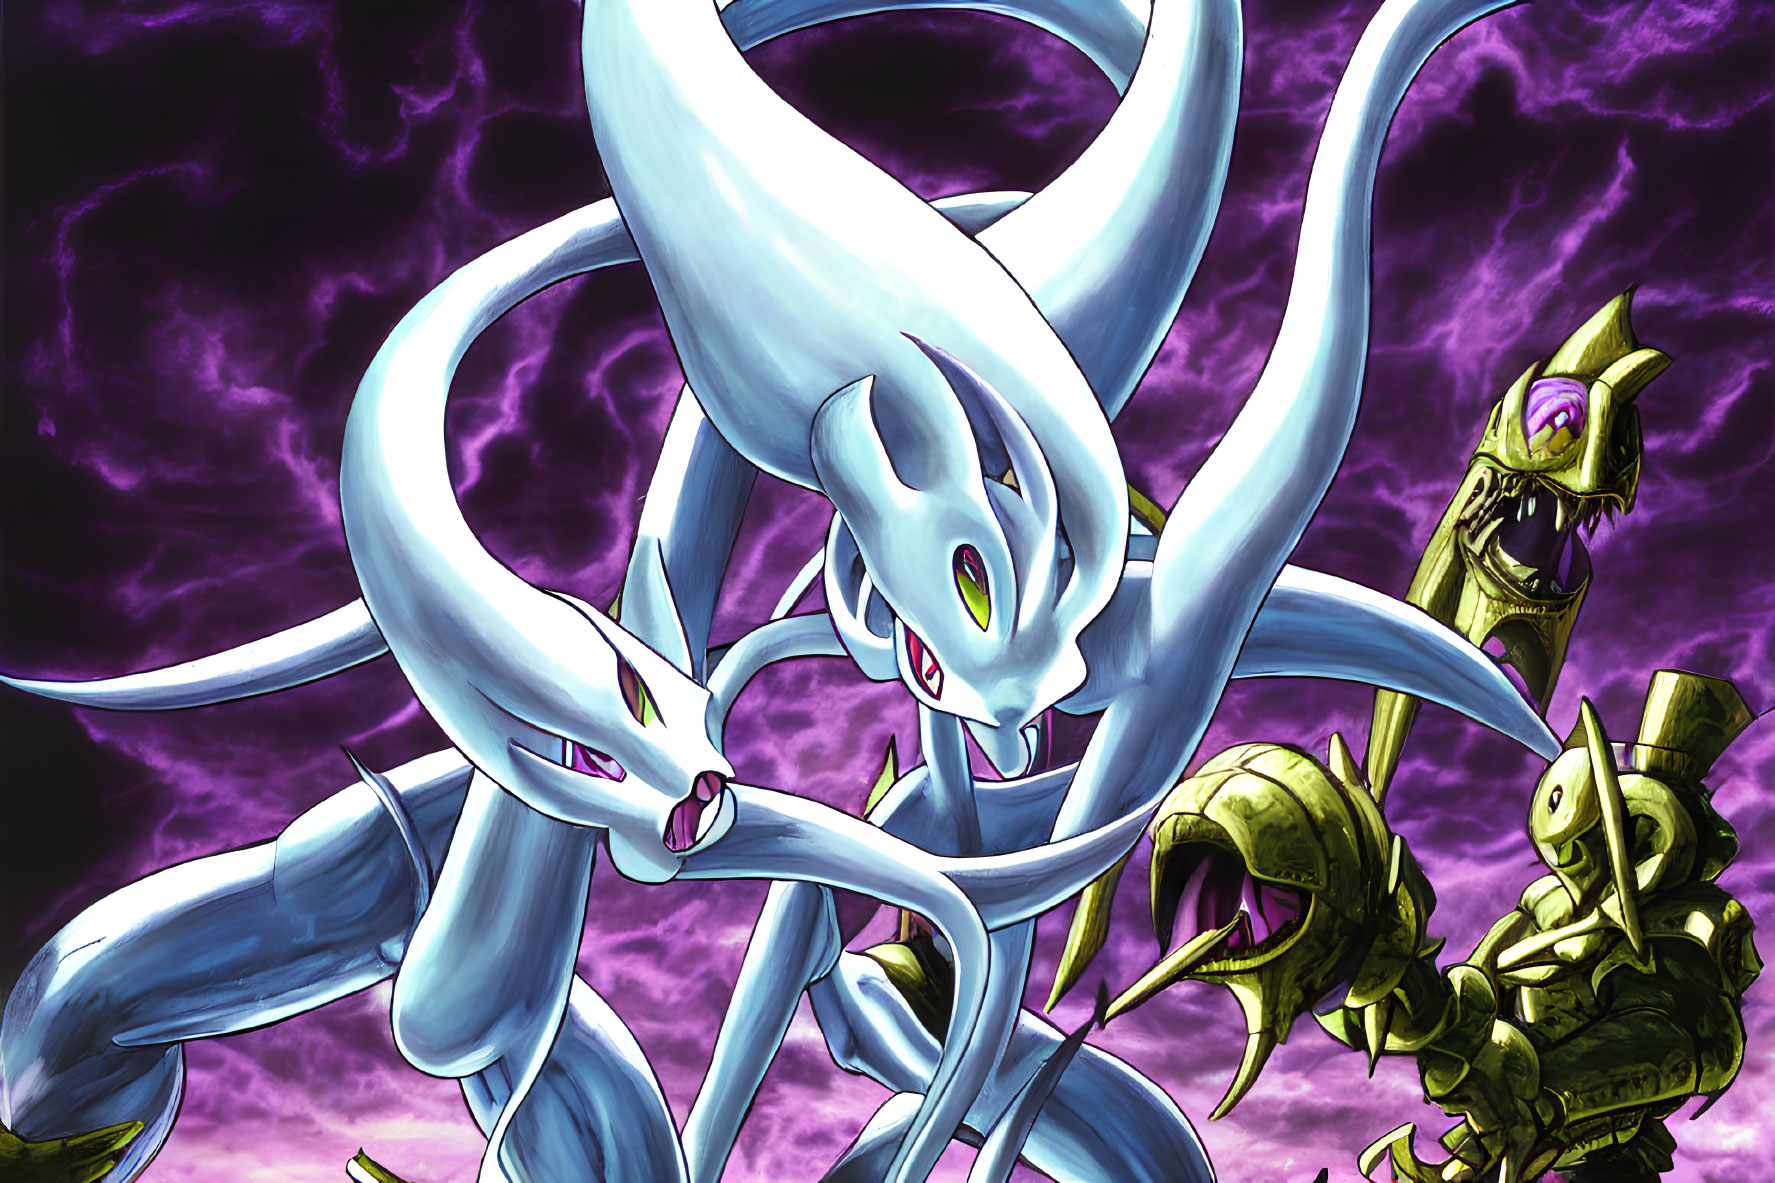 Illustration of Blue-Eyes White Dragon with armored warriors in purple cloud backdrop